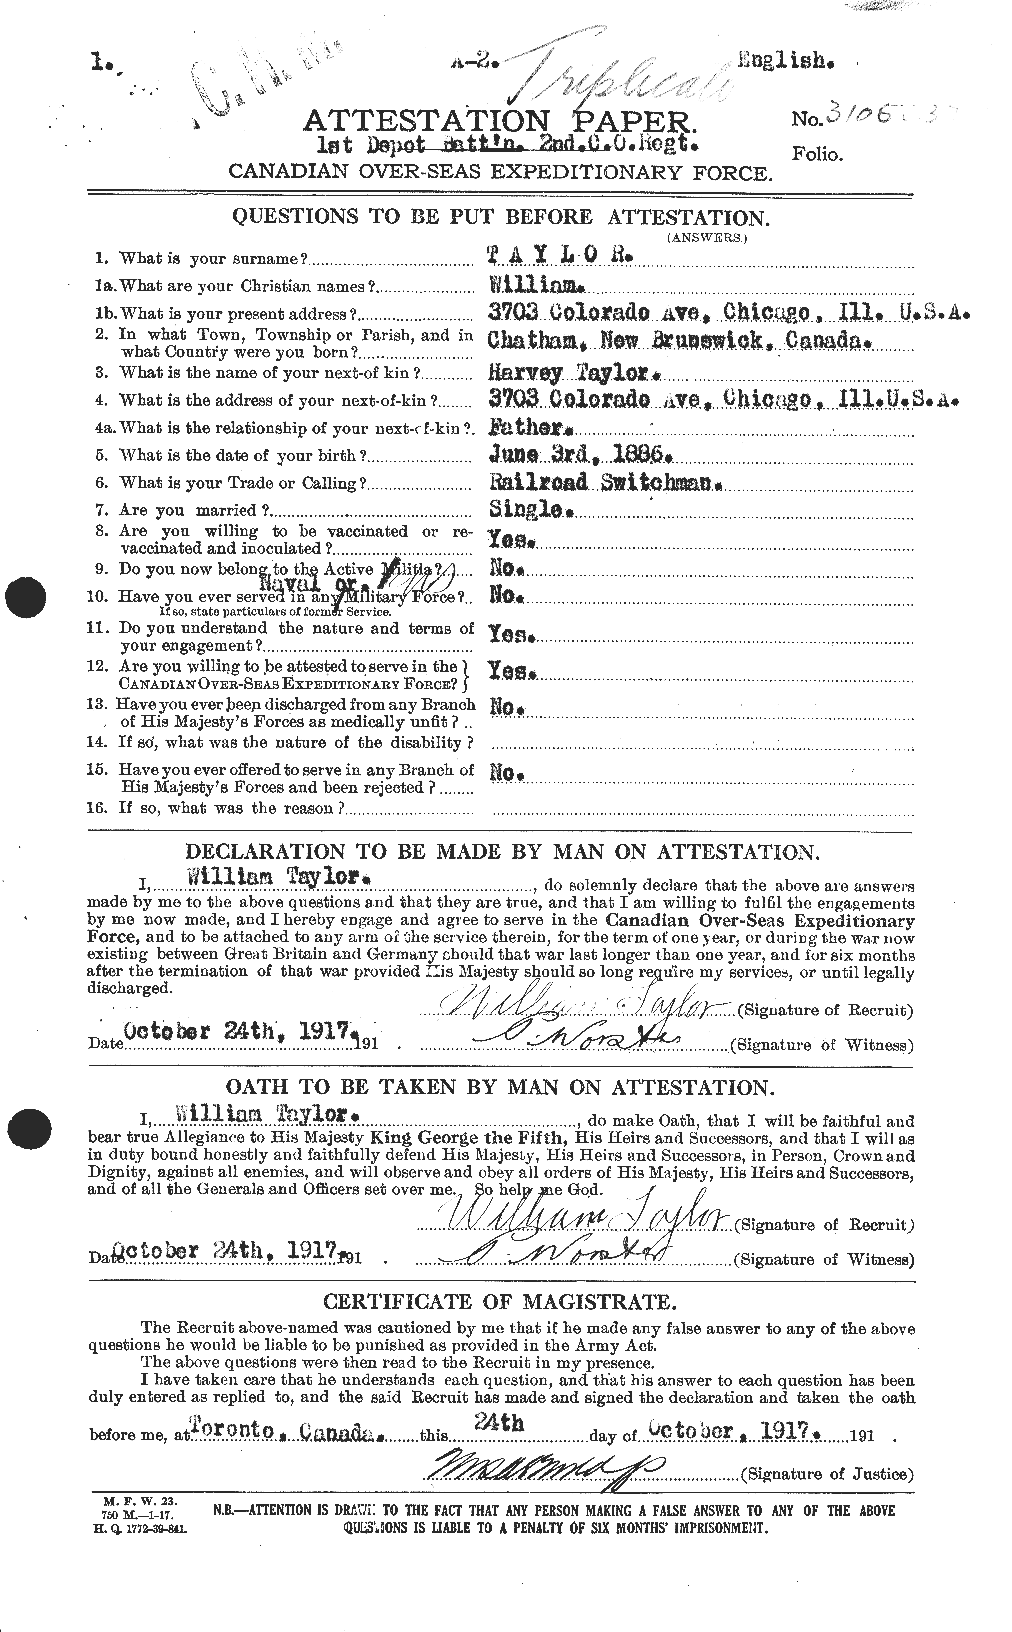 Personnel Records of the First World War - CEF 628115a